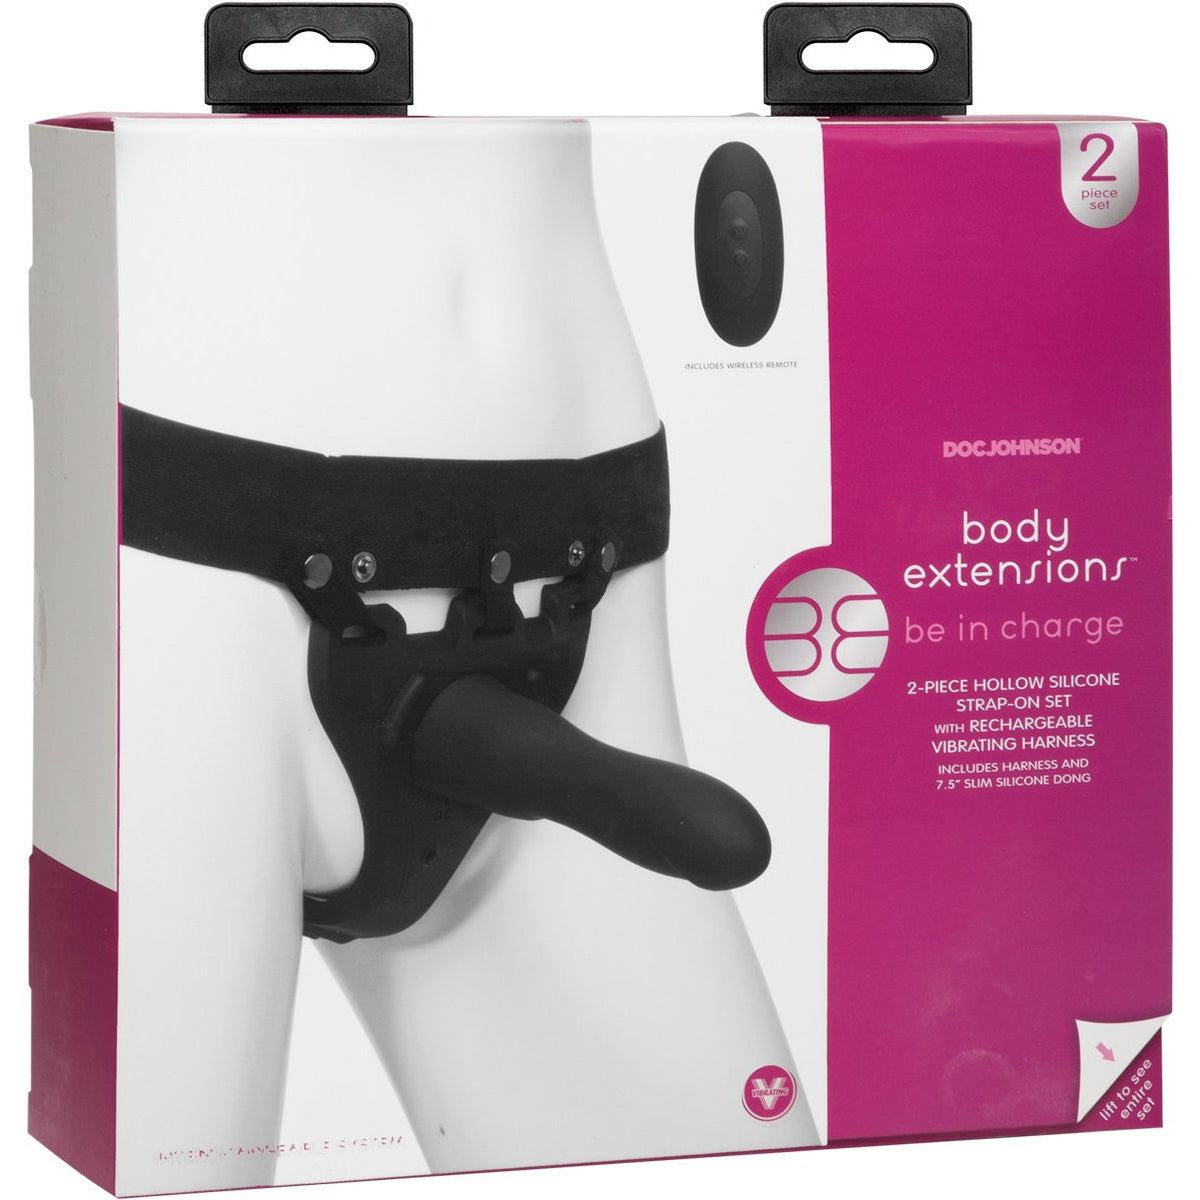 Doc Johnson Body Extensions – Be in Charge 2 Piece Strap-On Set with Vibrating Harness